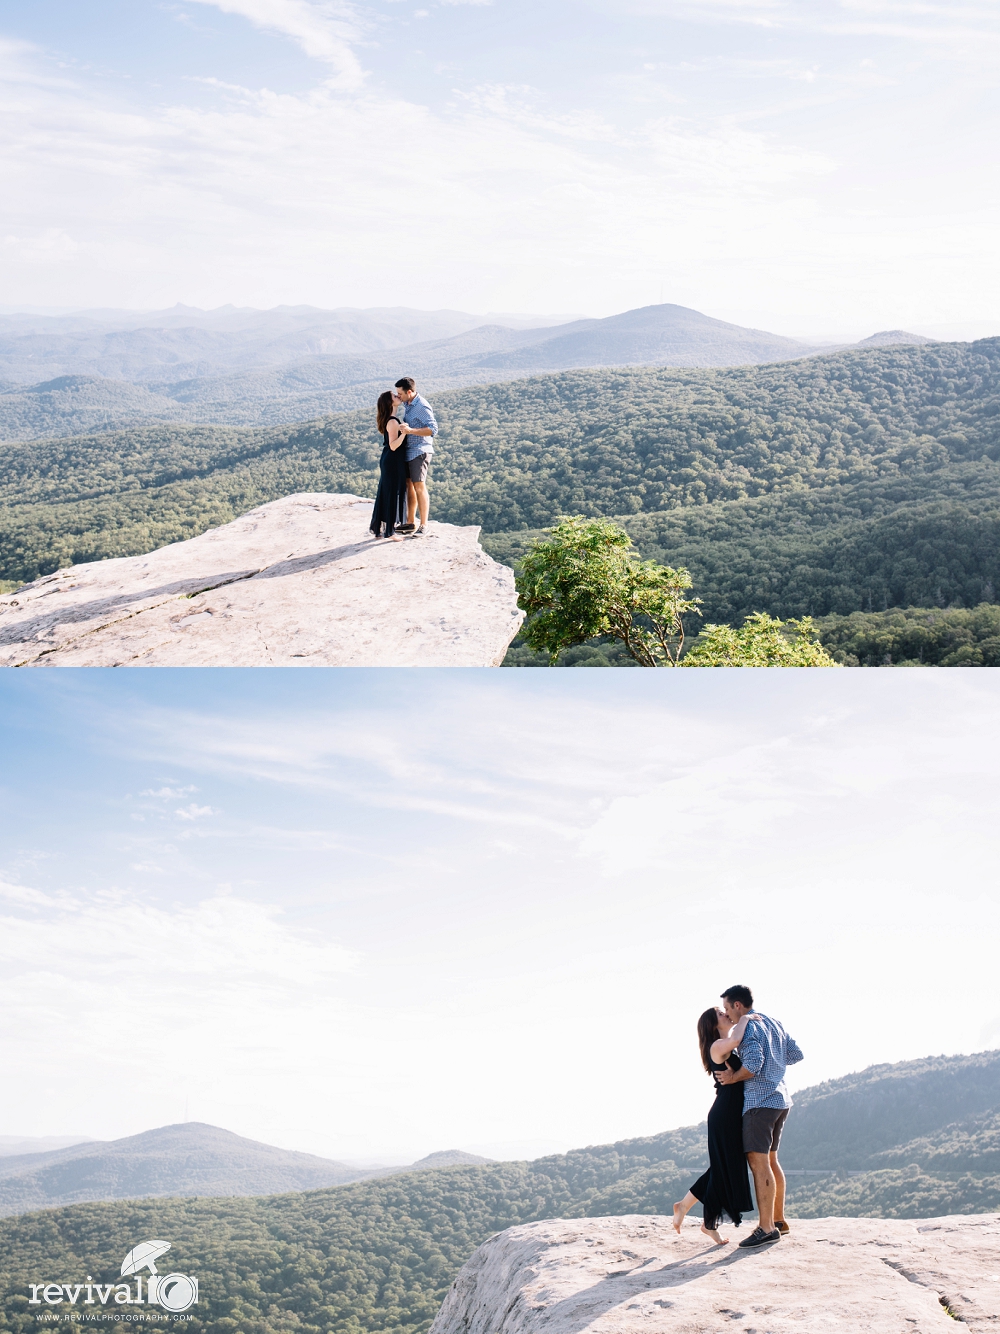 Amy + Troy: An Engagement Session on the Blue Ridge Parkway